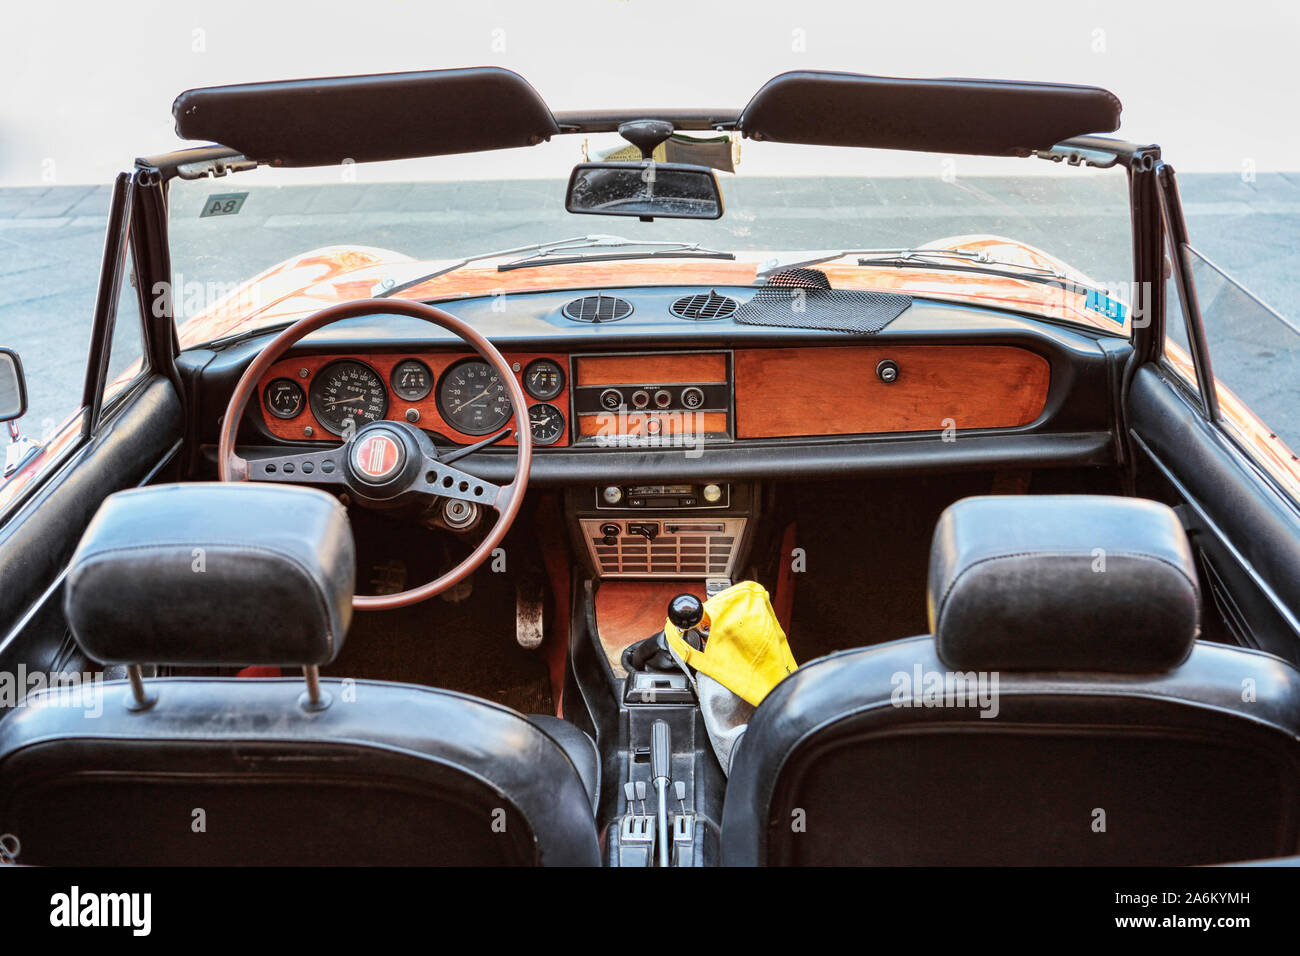 Fiat Interior High Resolution Stock Photography And Images Alamy